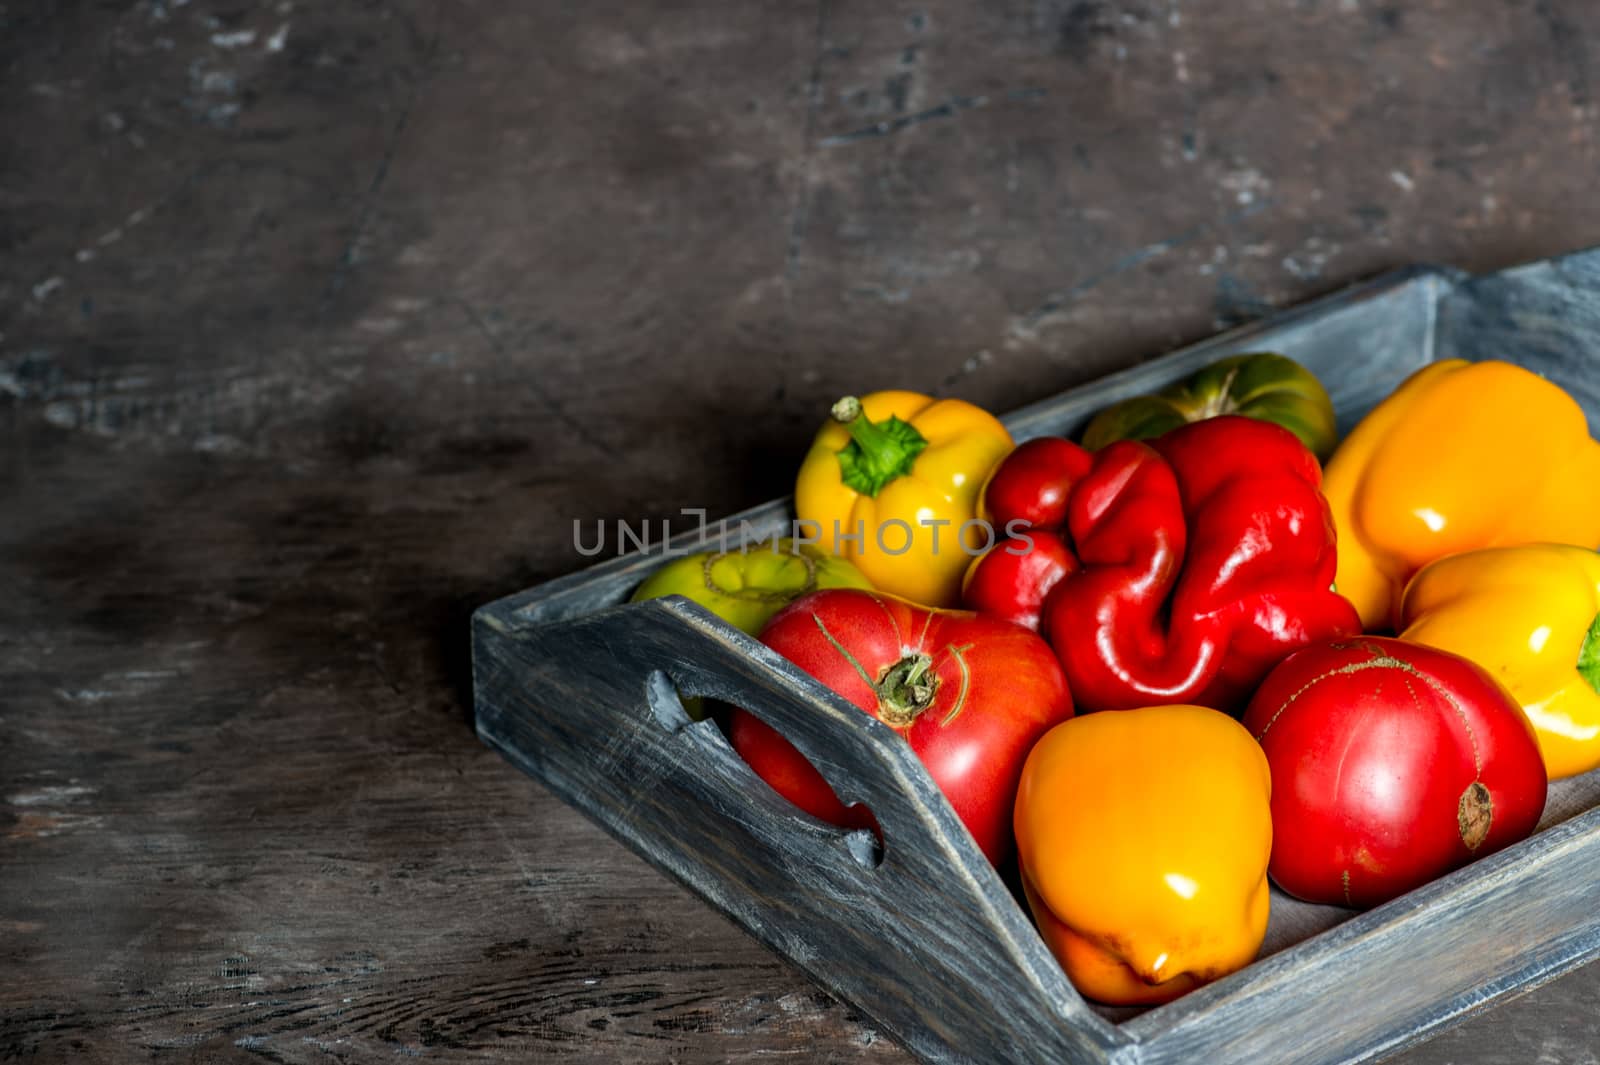 Imperfect natural peppers and tomatoes on an old wooden tray on a dark background. Healthy eating concept. Copy Space.